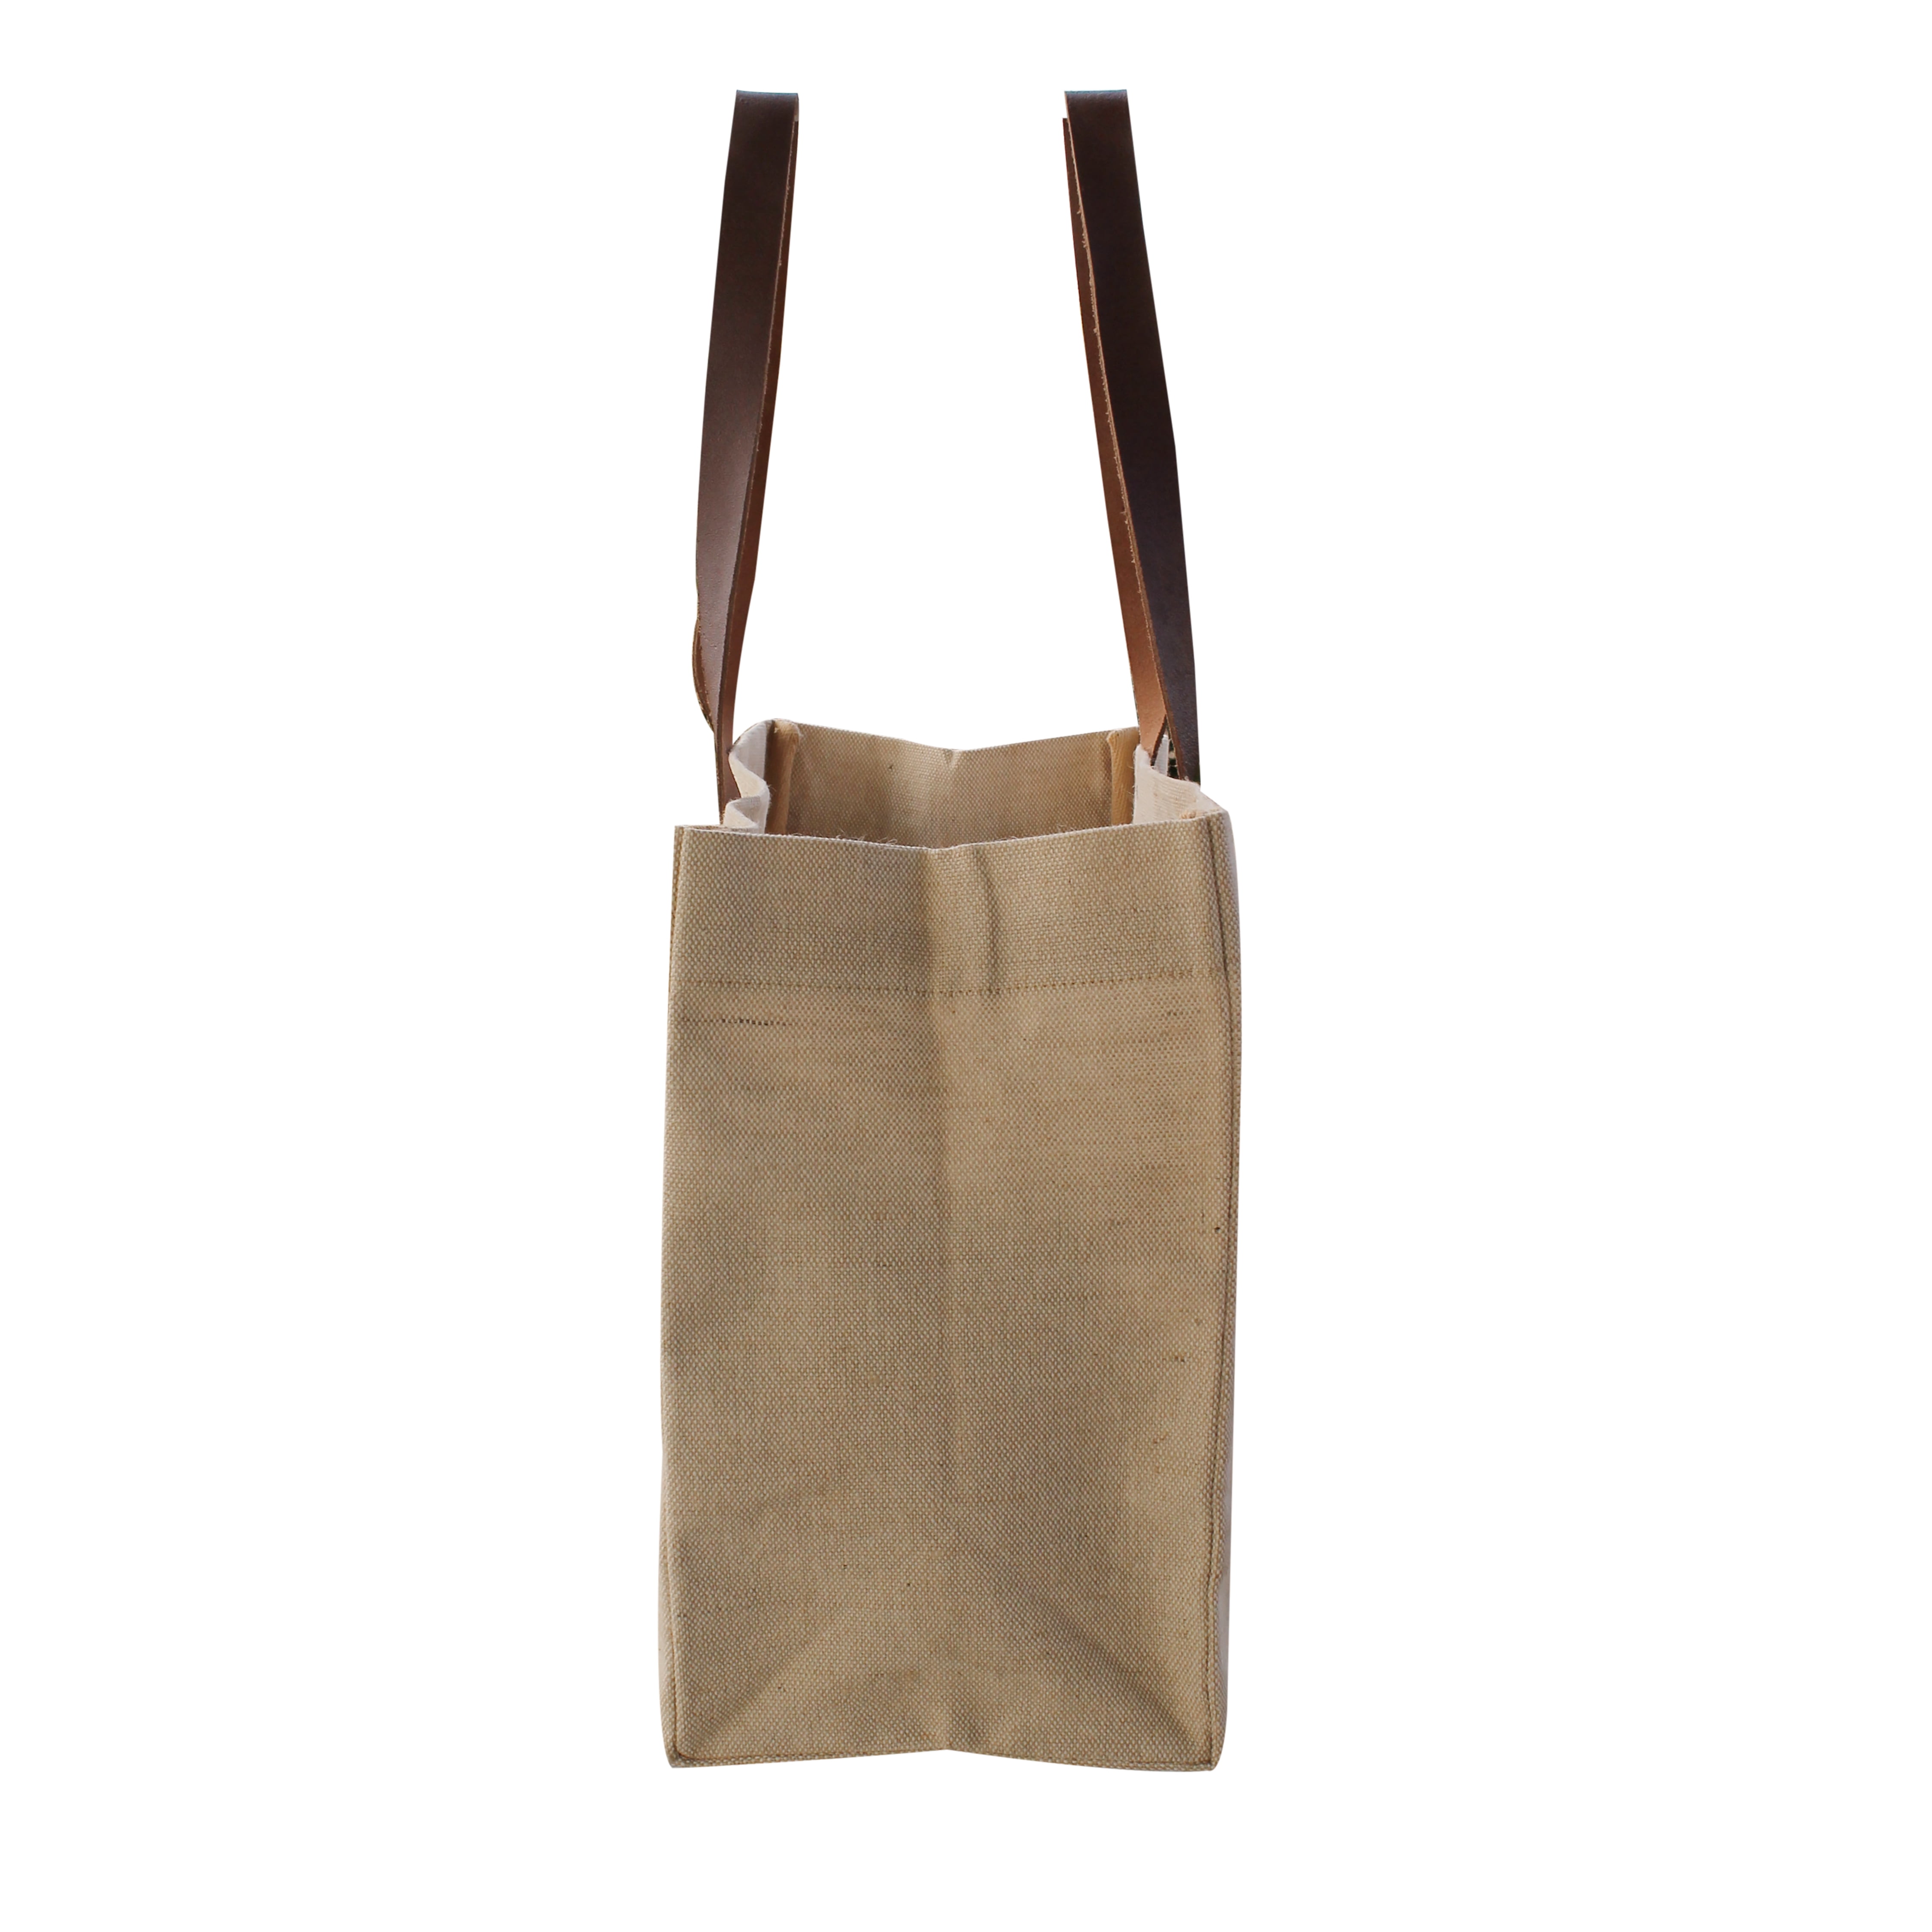 Reusable Grocery Bag Shopping Tote Cotton Jute Burlap with Leather Handles 